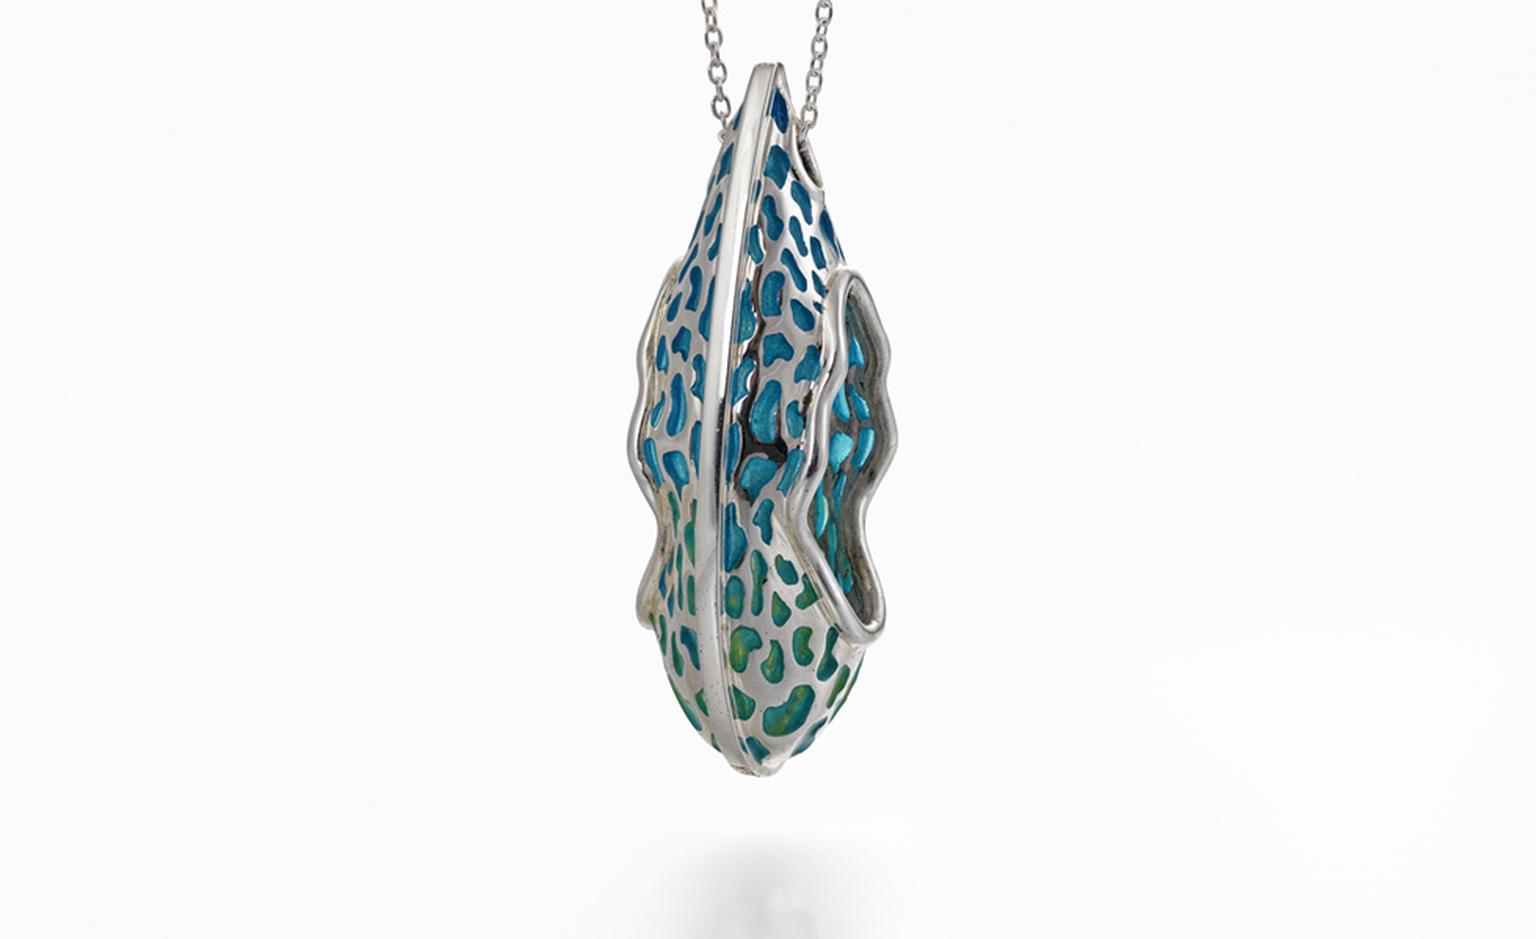 Teardrop shaped pendant with blue and green enamel and diamond set on the edge by Regina Aradesian. Price from £2400